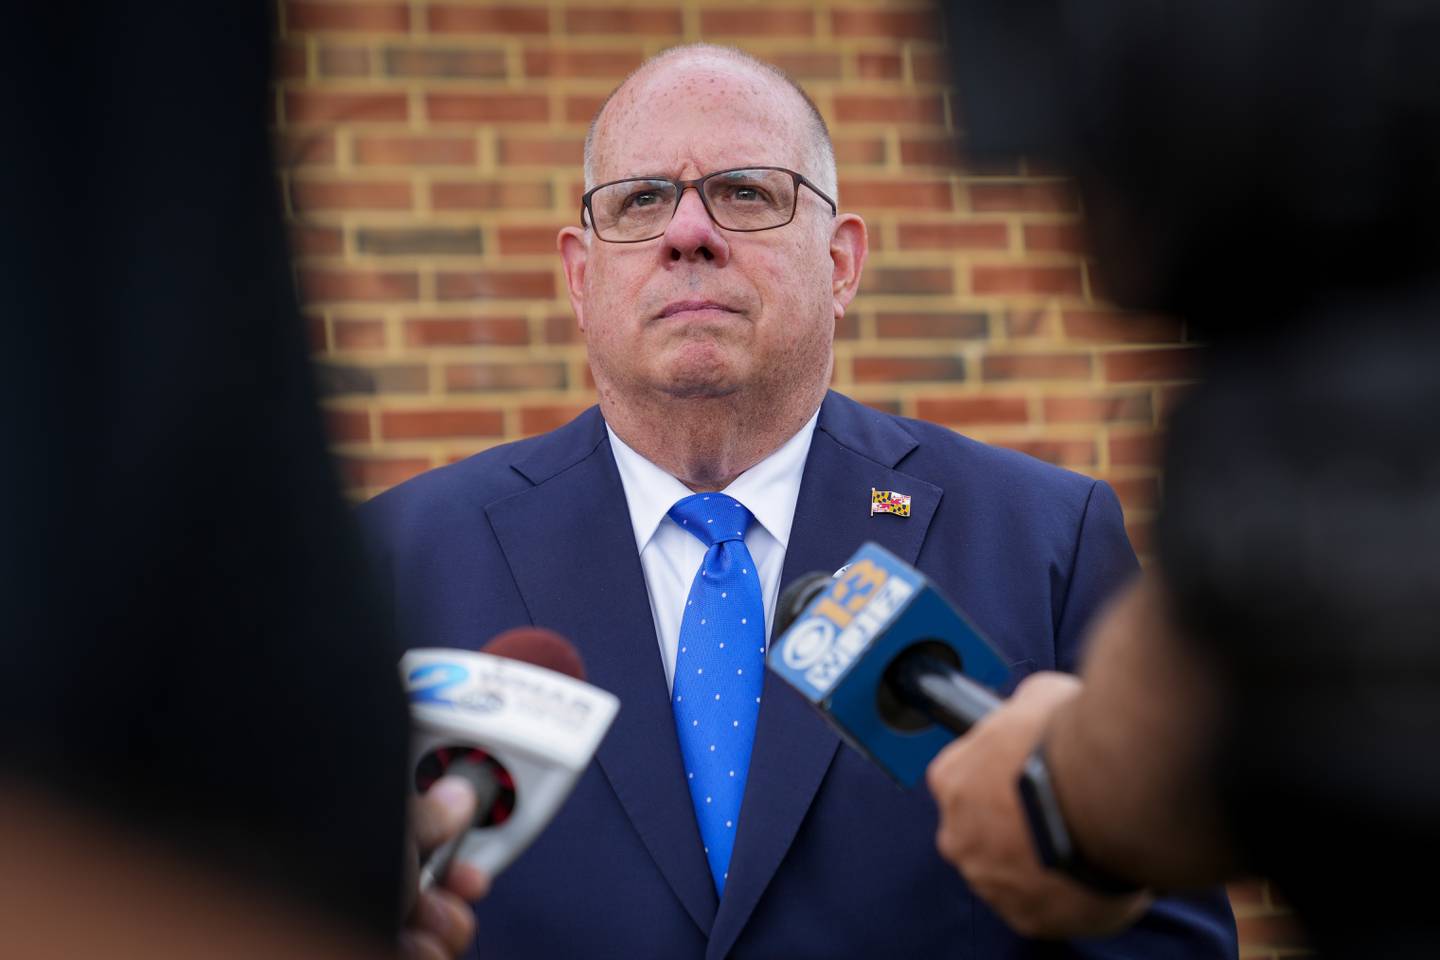 7/7/22—Gov. Larry Hogan speaks to reporters outside Annapolis Middle School on the first day of early voting in Maryland’s Primary Election.